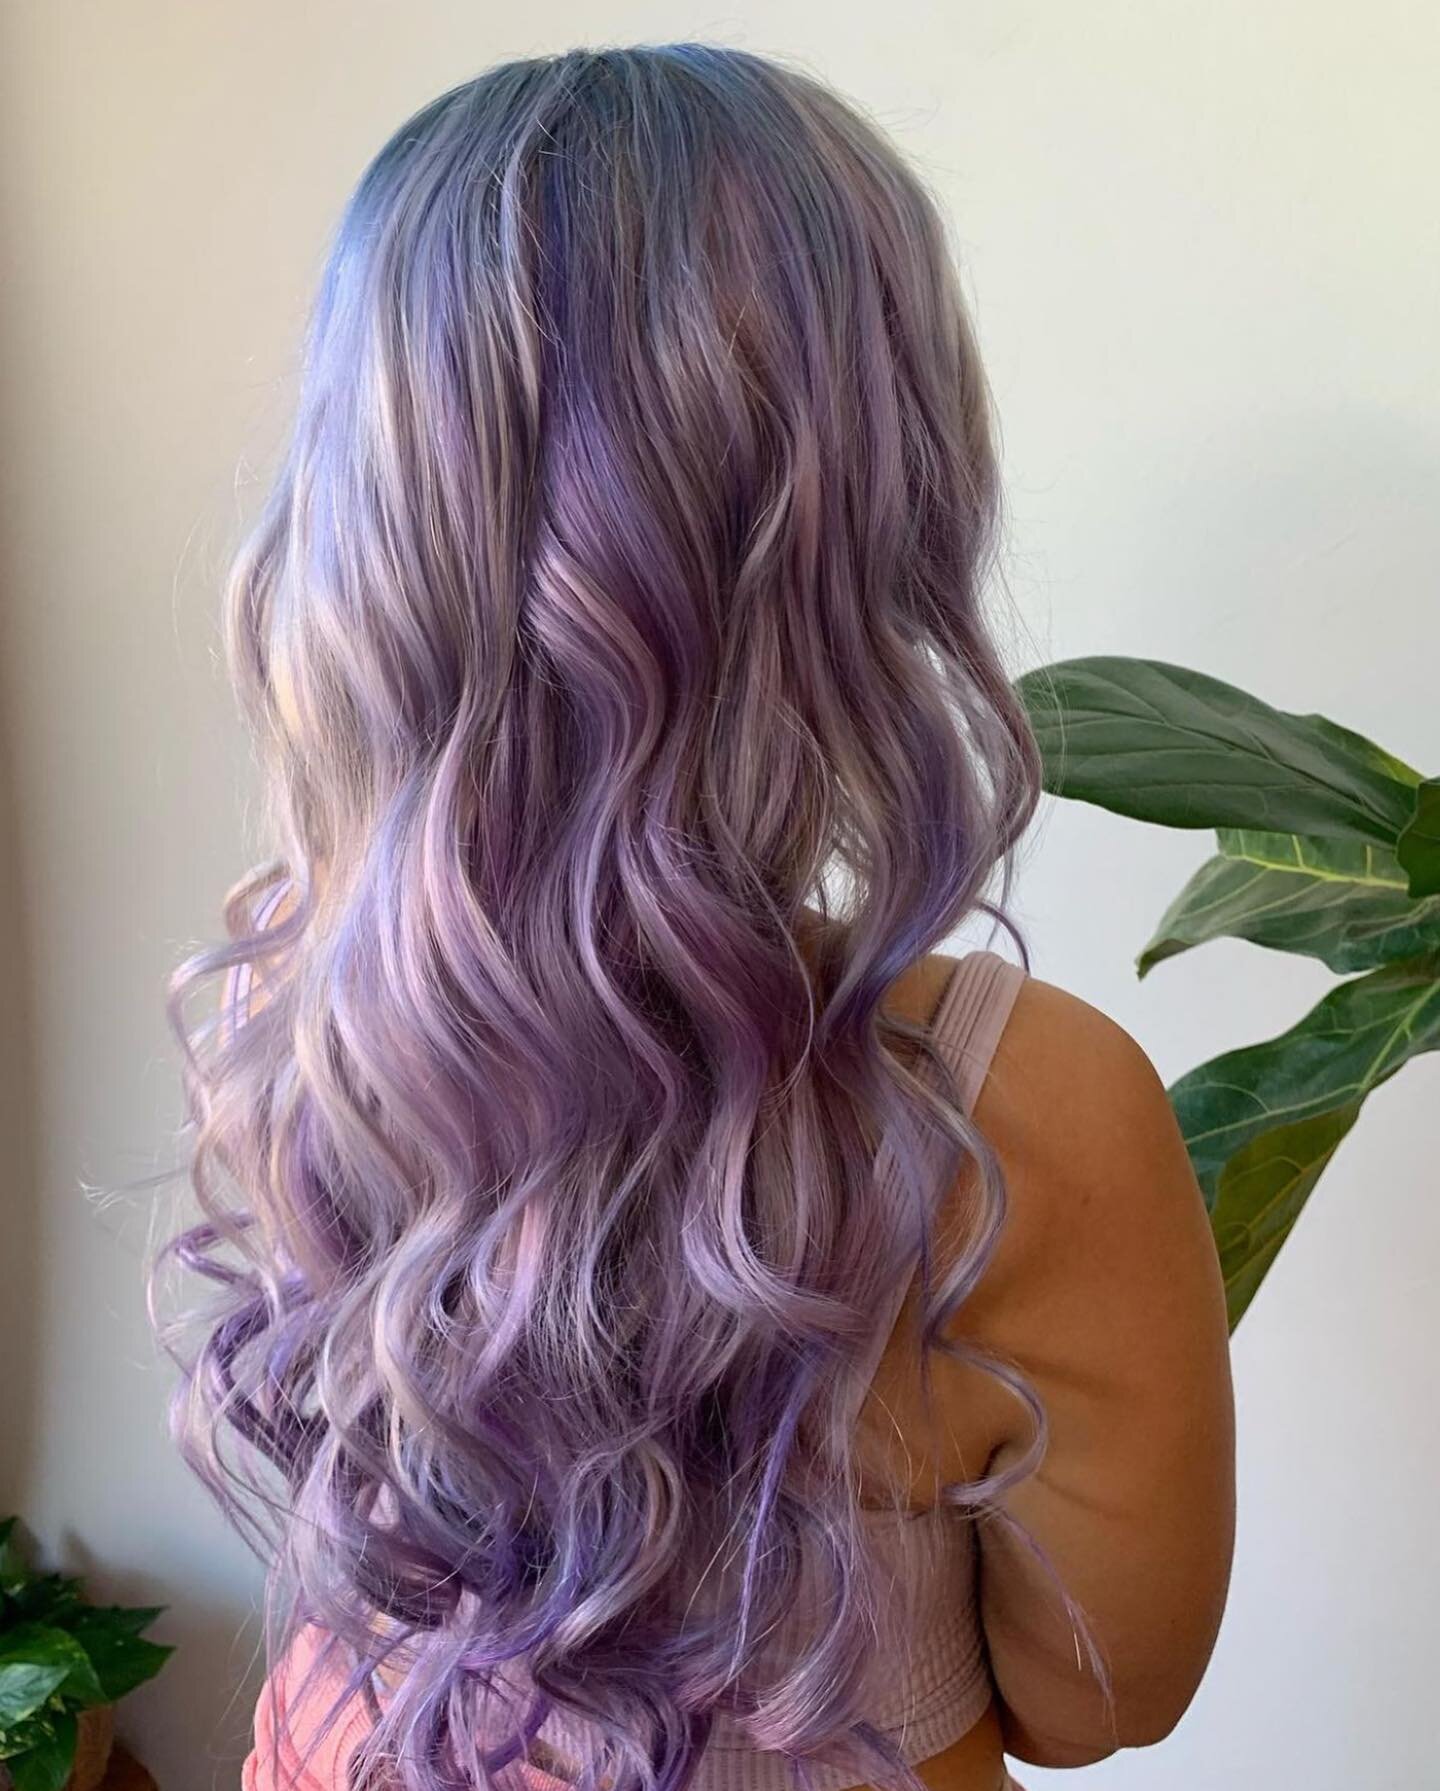 Lilac!!!💜 This phenomenal beauty created by our very own @hairwith.brittany . Amazing.👏